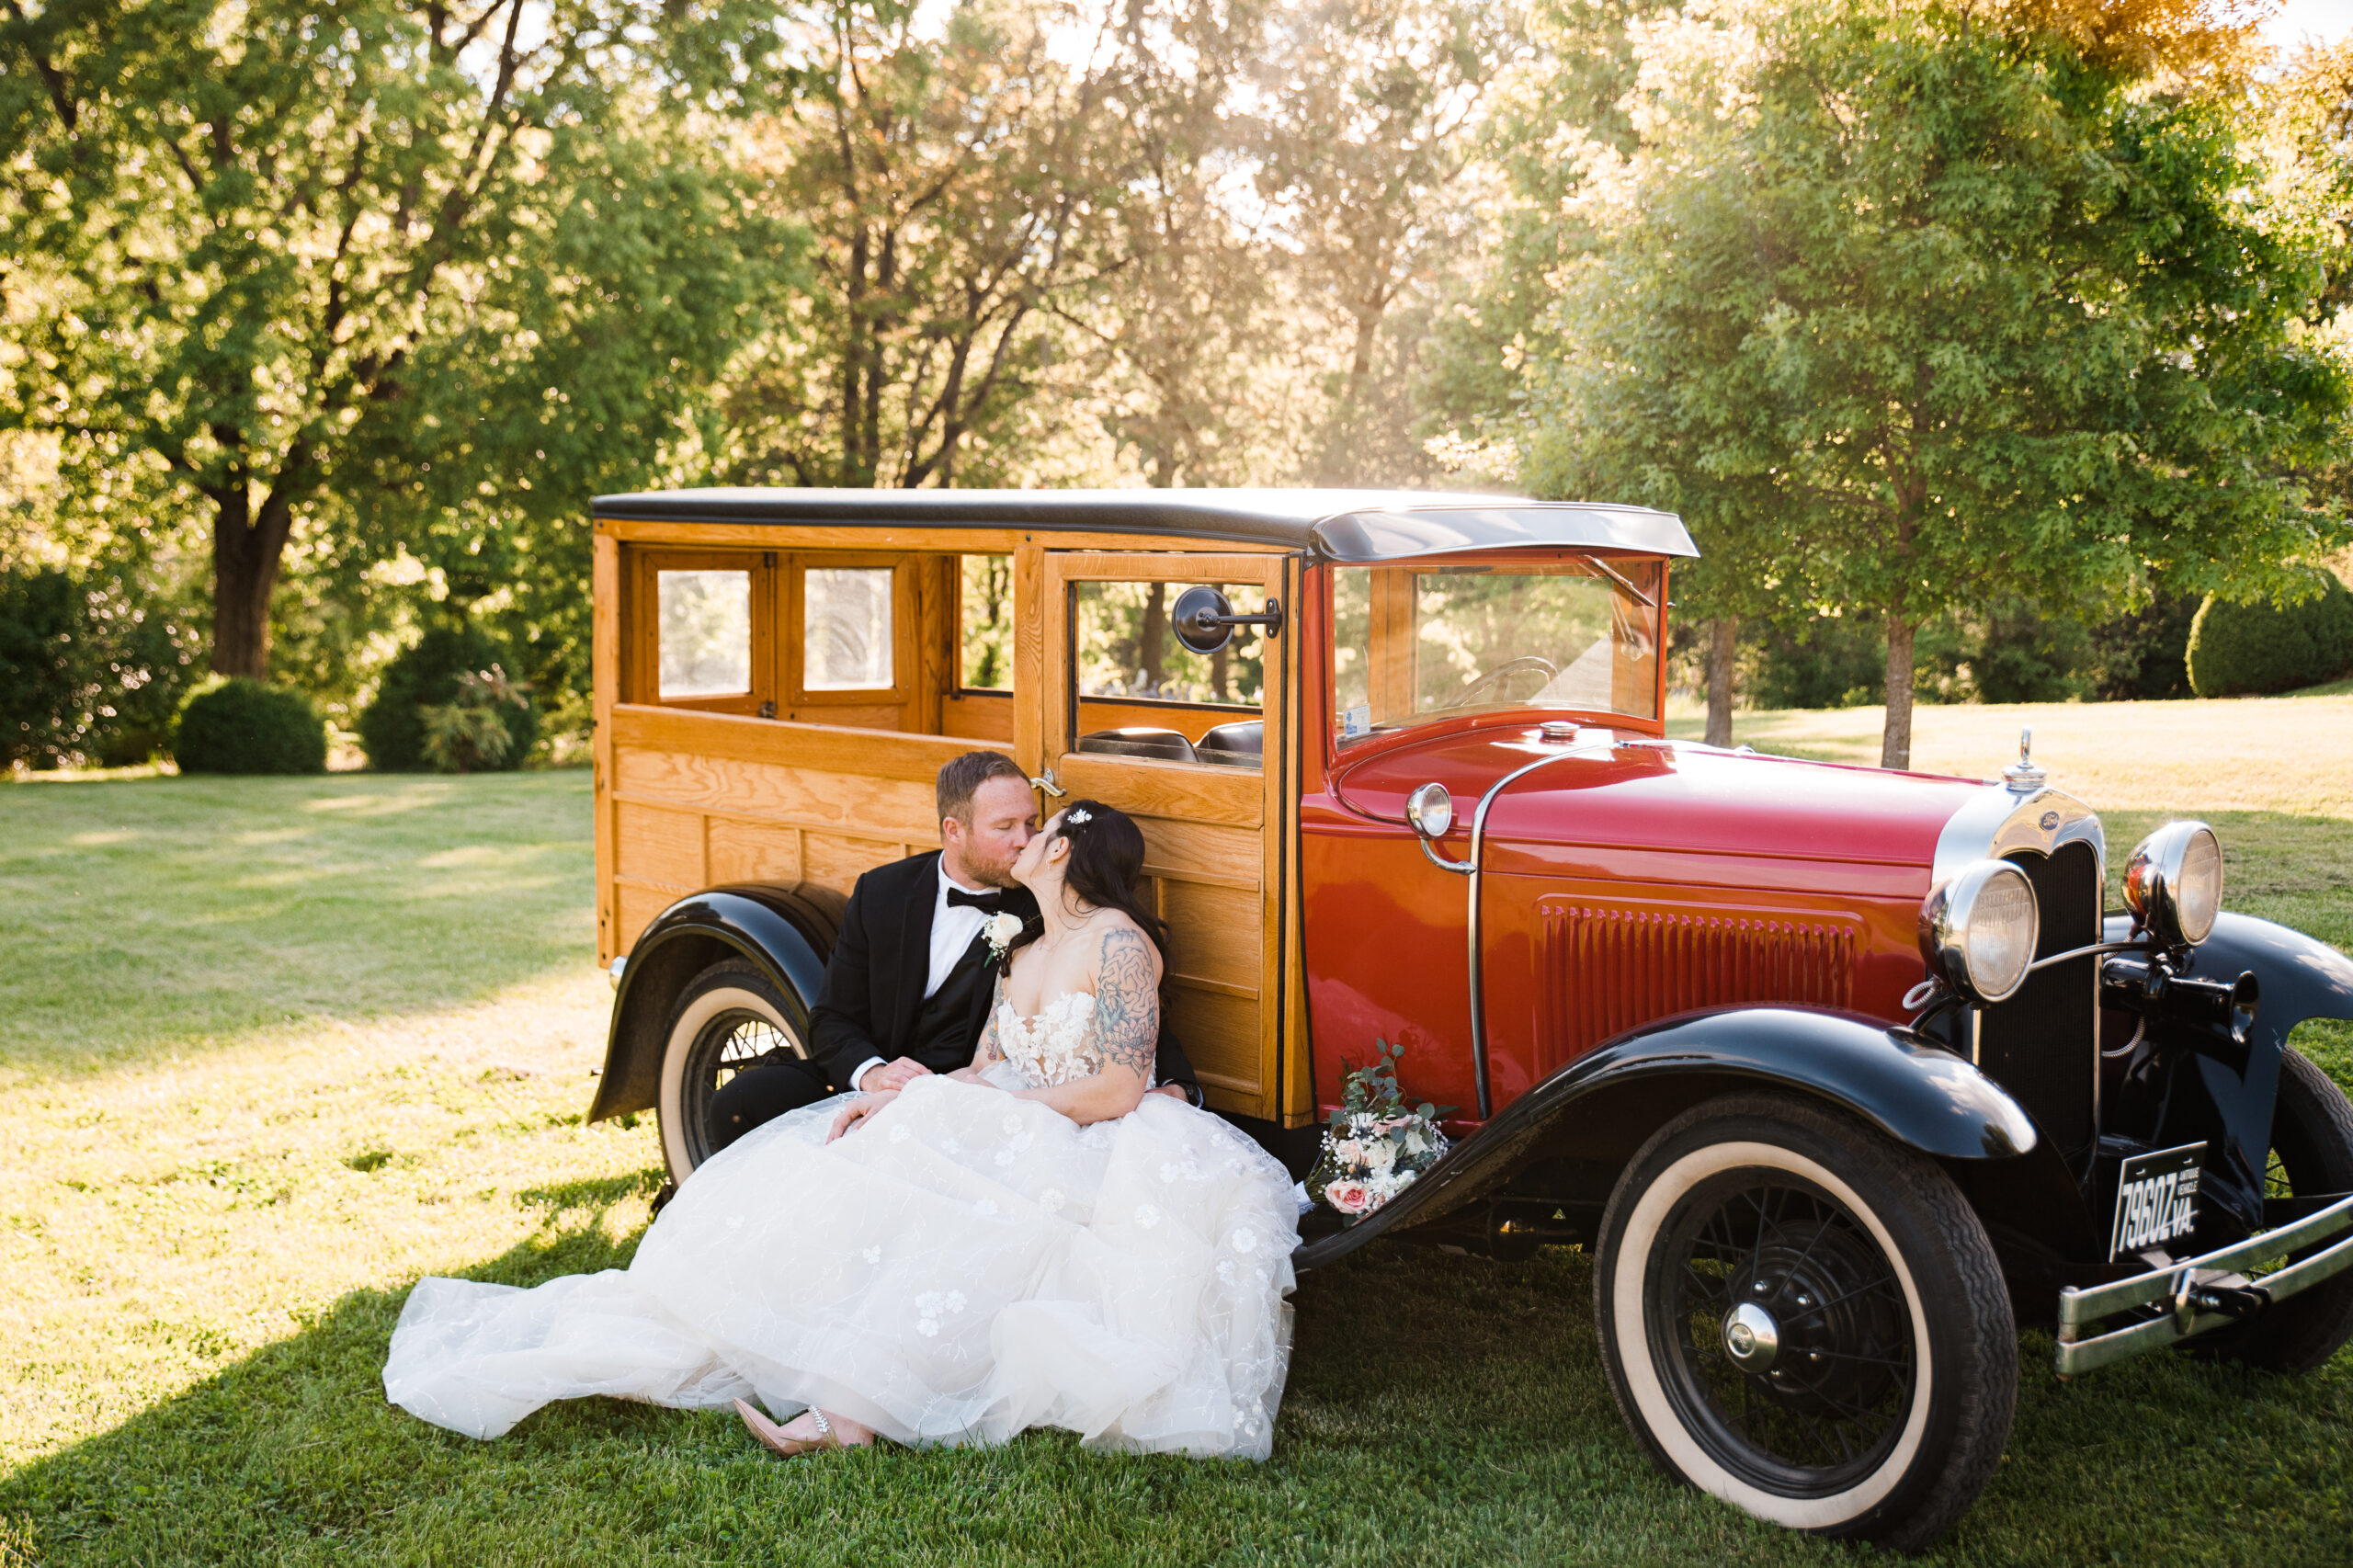 A man and woman sitting in front of a vintage car kissing